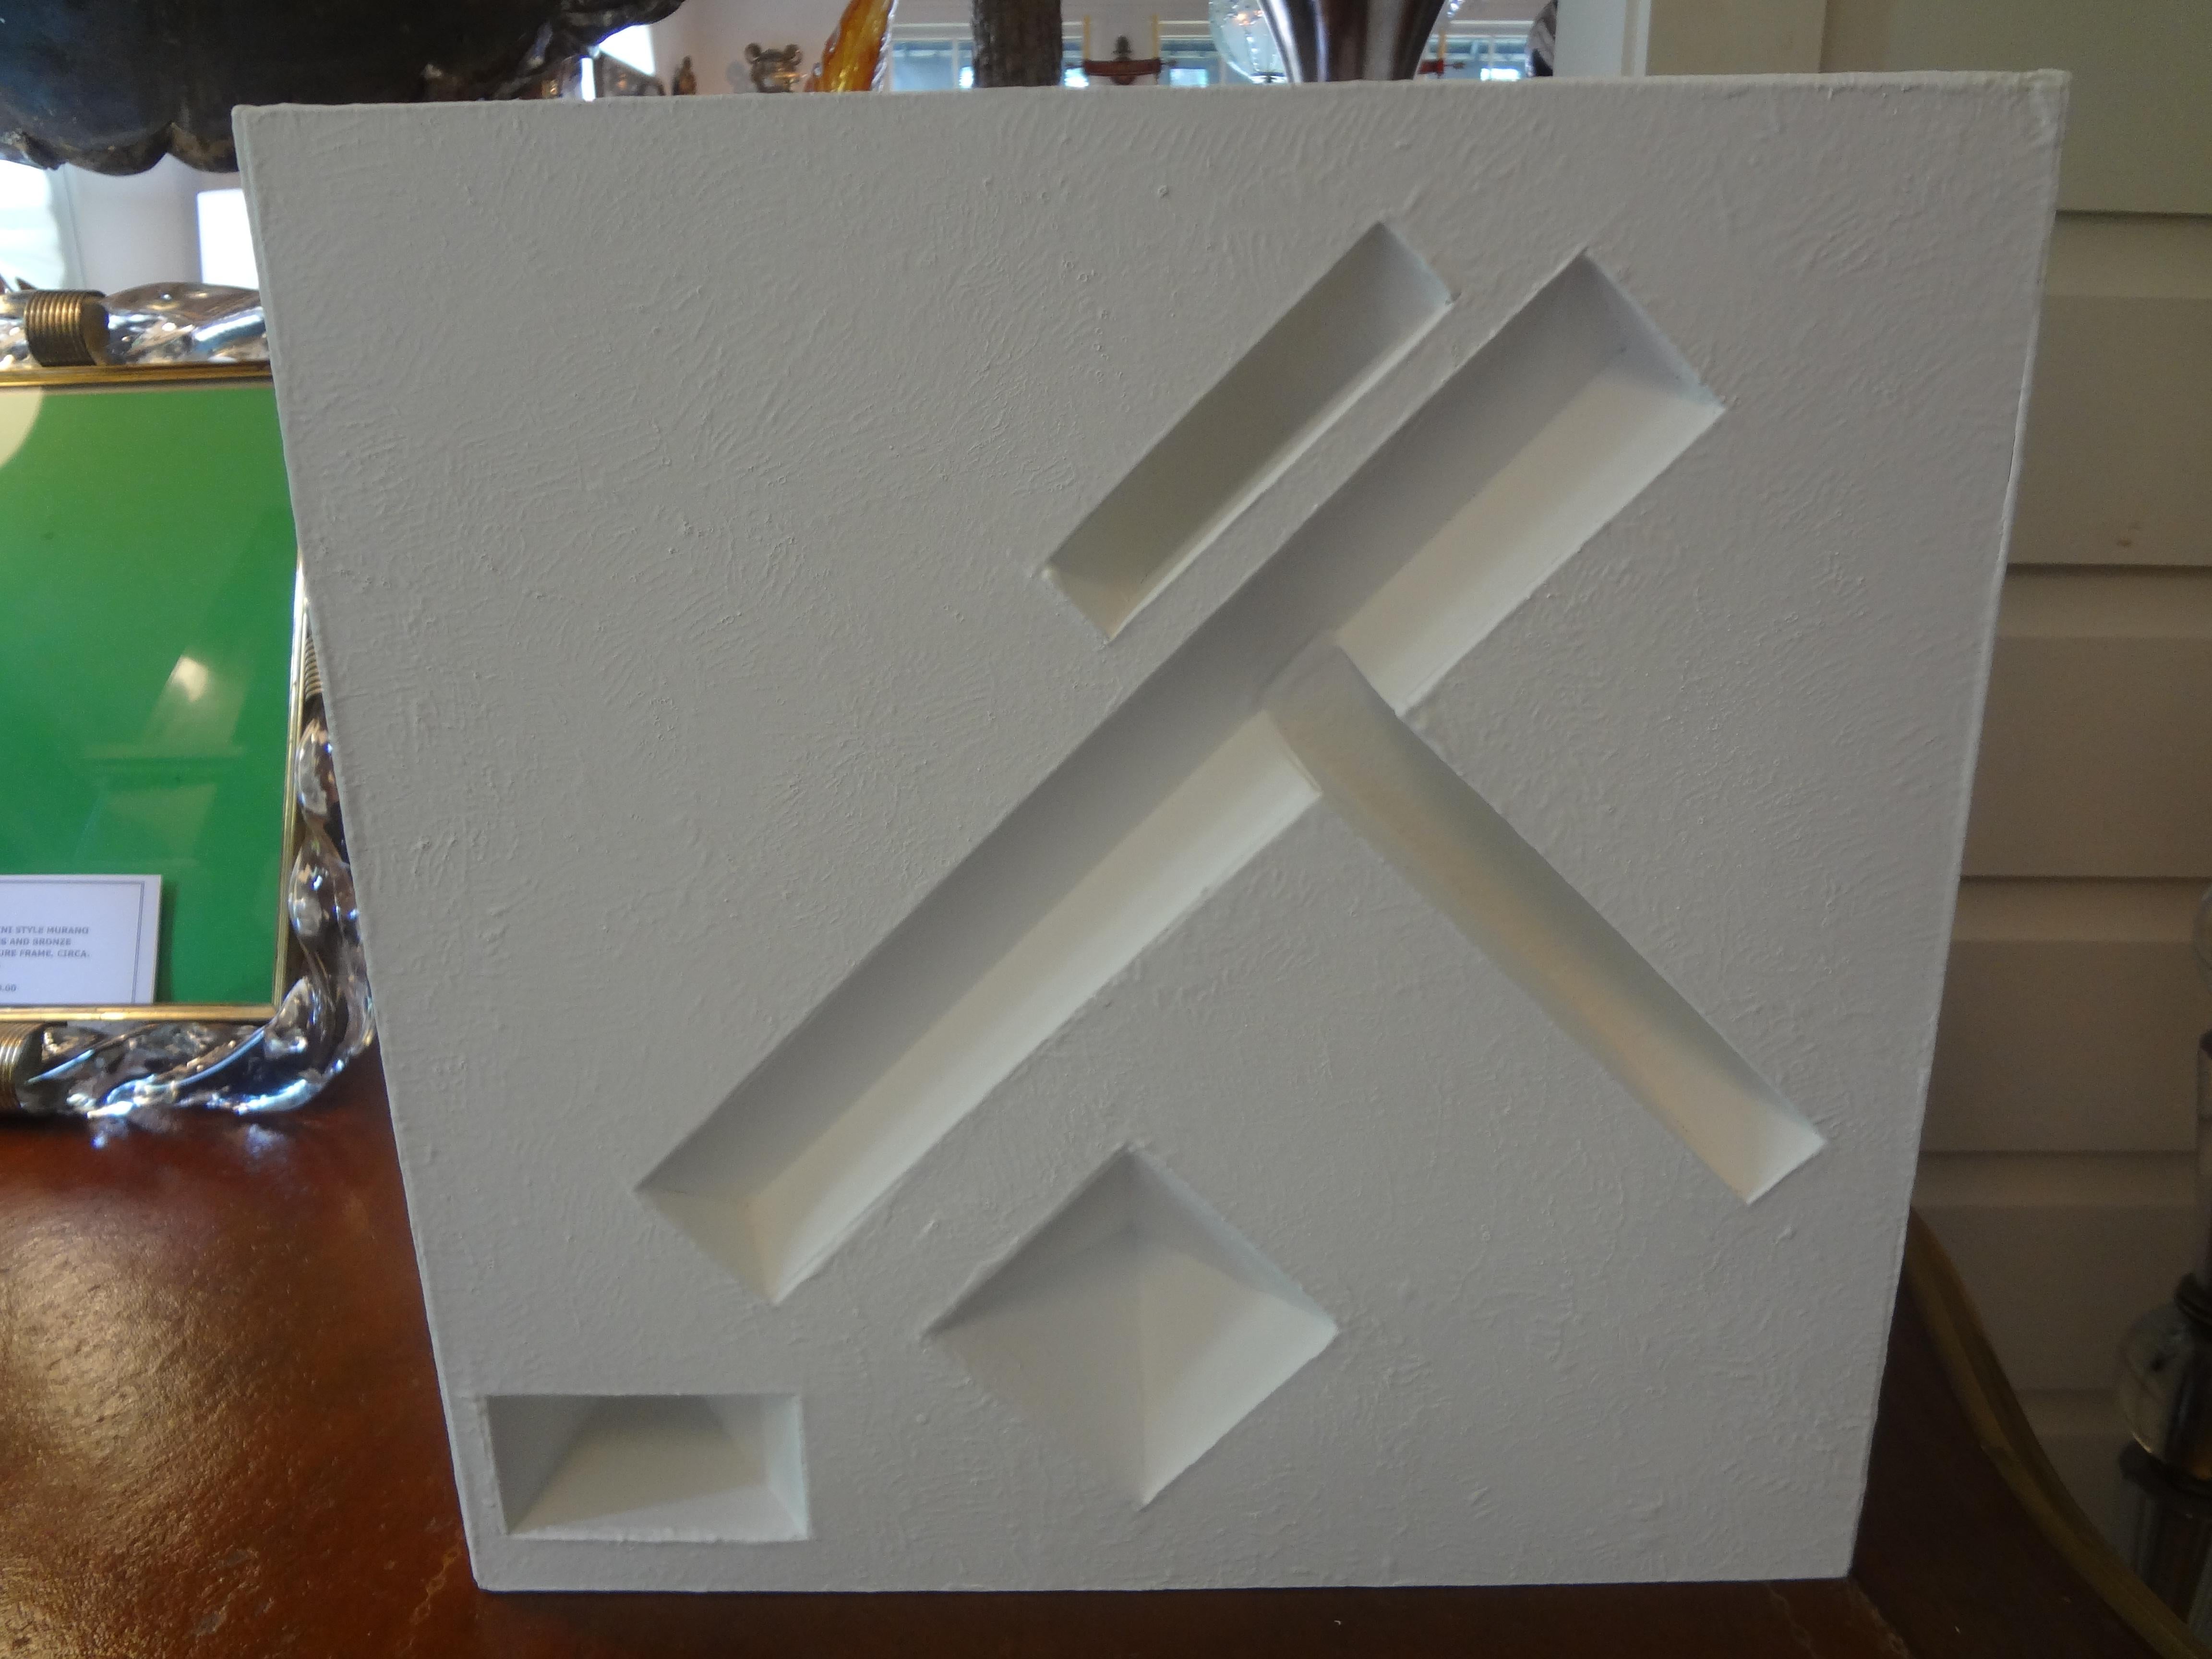 20th Century Mid-Century Modern Abstract Cube Sculpture Signed Steve Upham For Sale